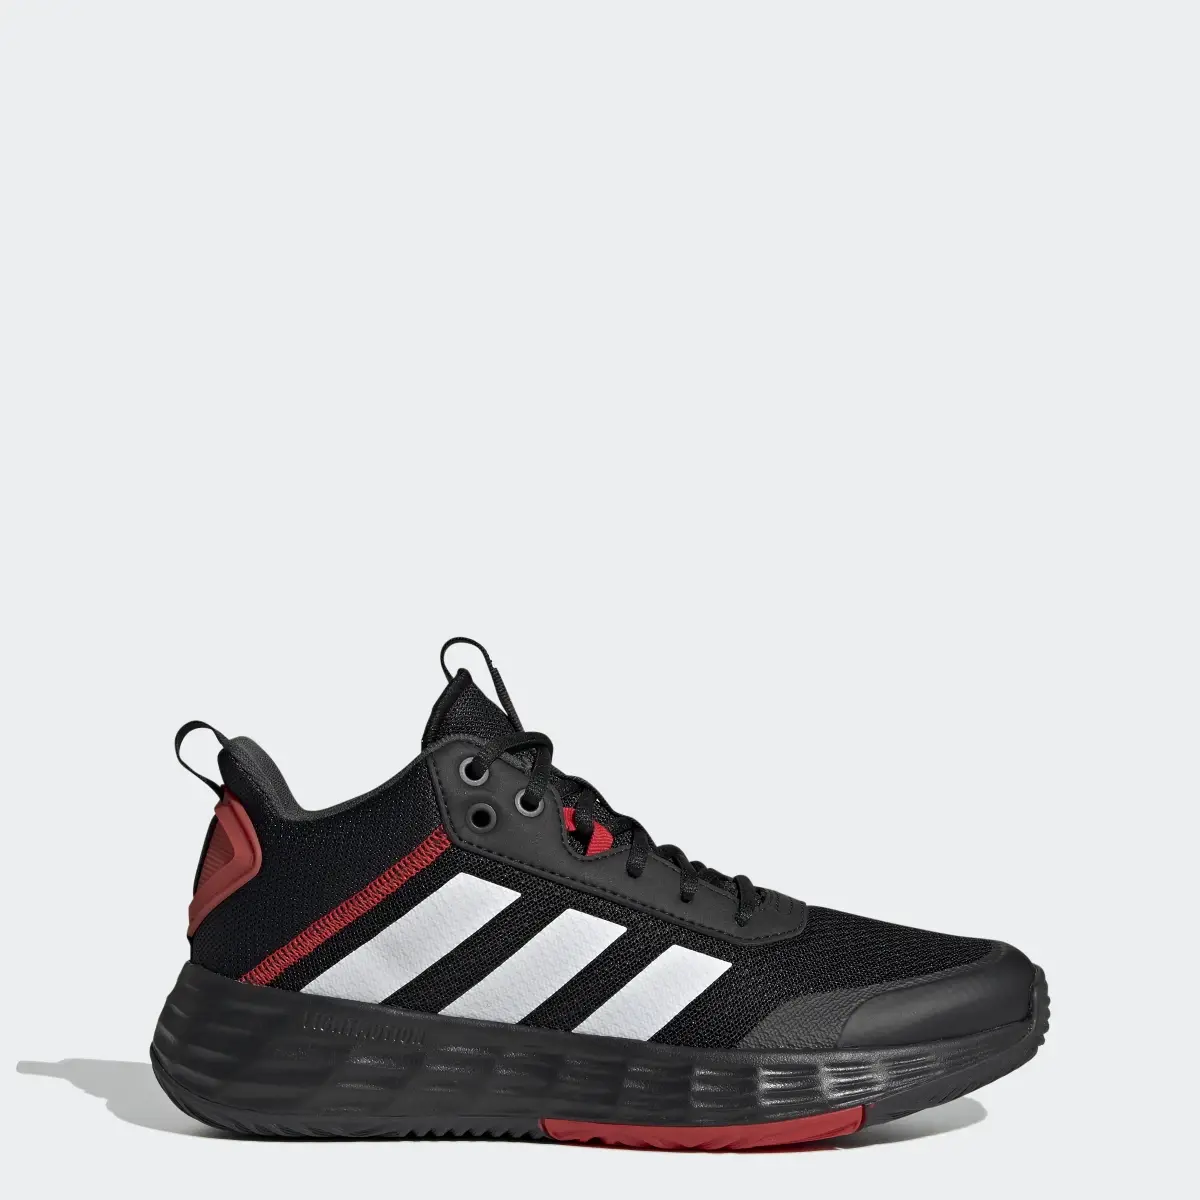 Adidas Chaussure Ownthegame. 1